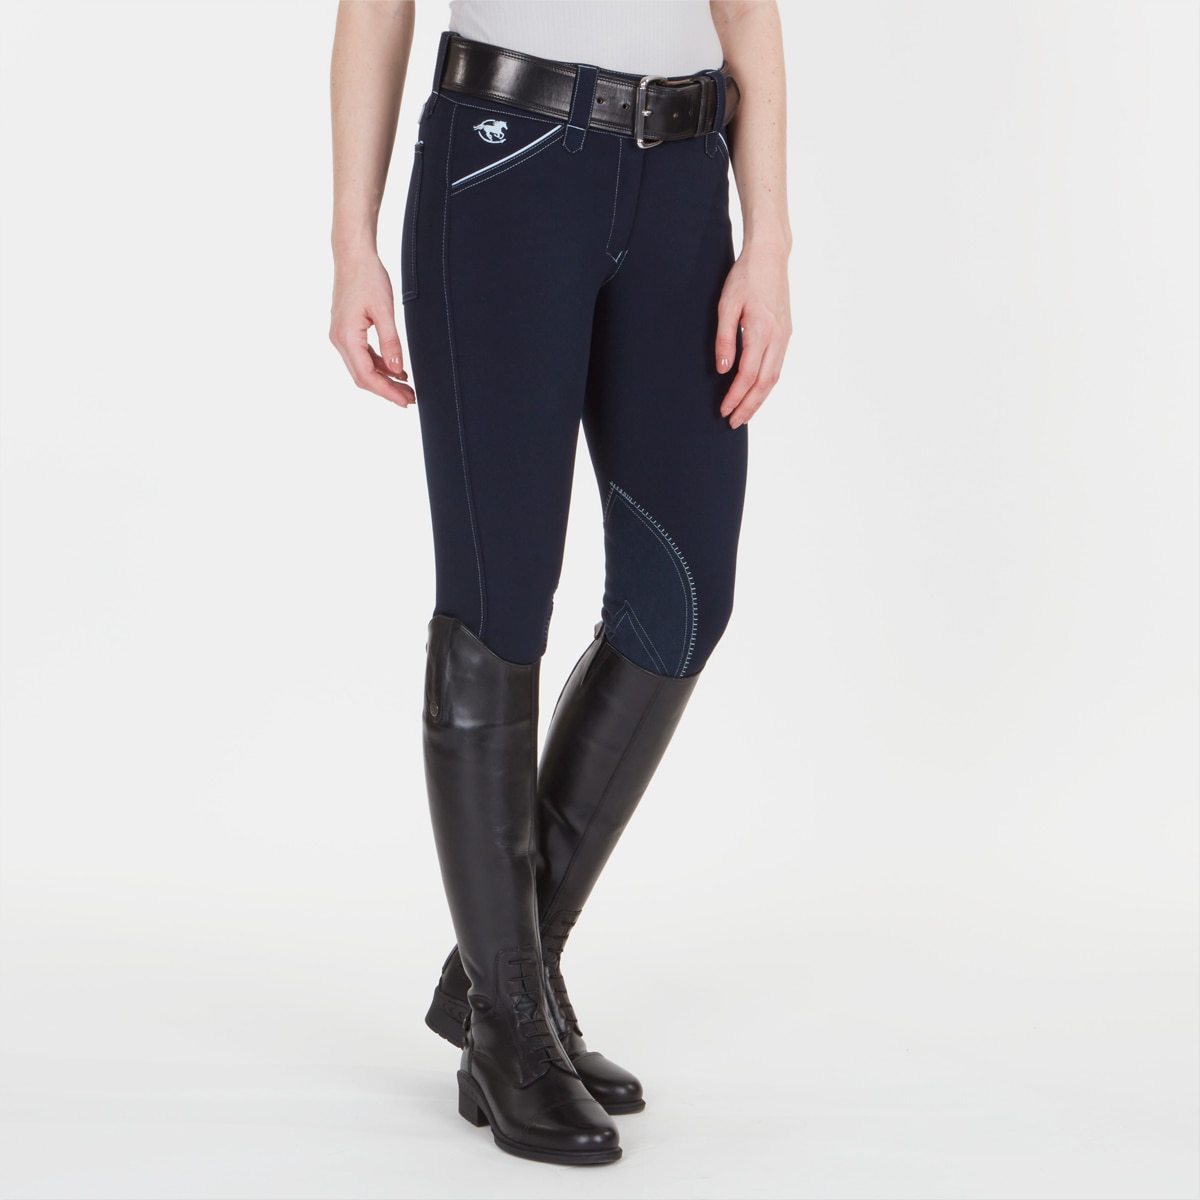 Piper Original Low-rise Breeches by SmartPak - Knee Patch